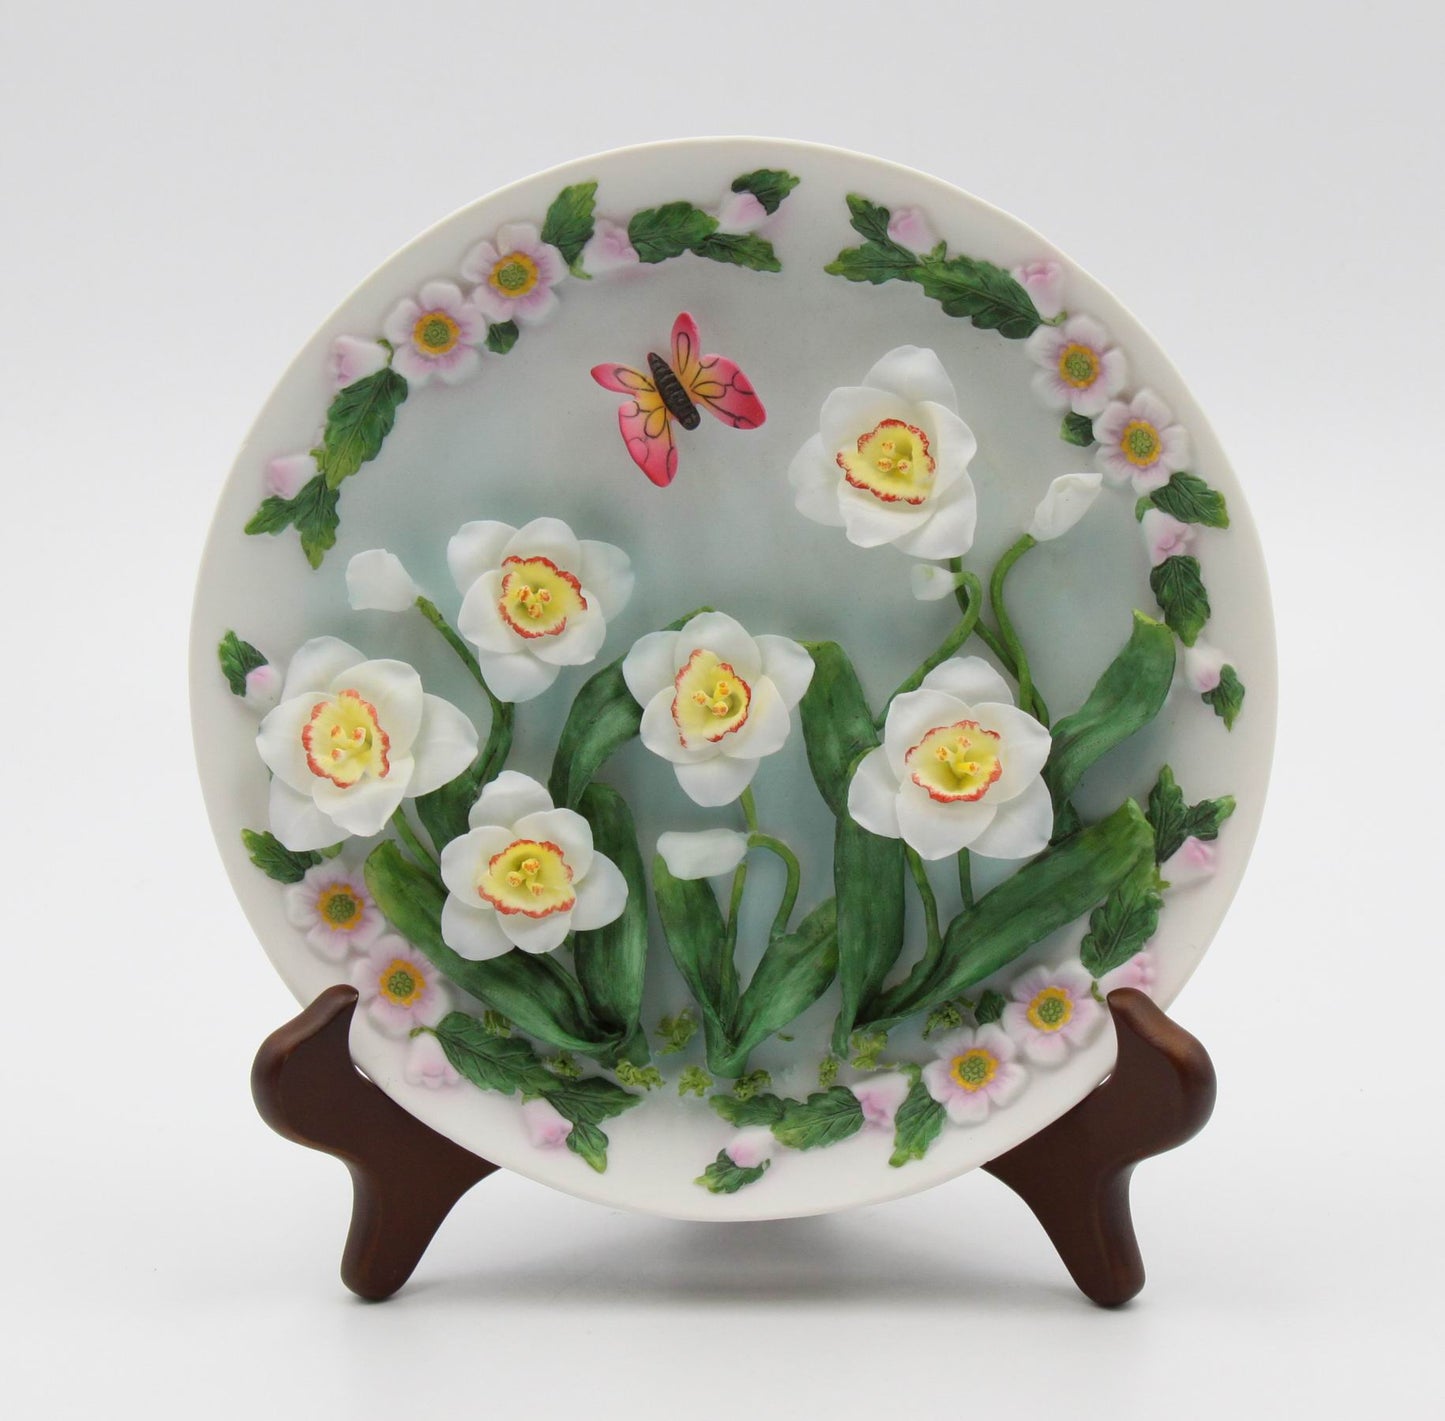 Butterfly with Narcissus Flowers Decor Plate and Stand, Home Décor, Gift for Her, Gift for Mom, Kitchen Décor, Vintage Decor